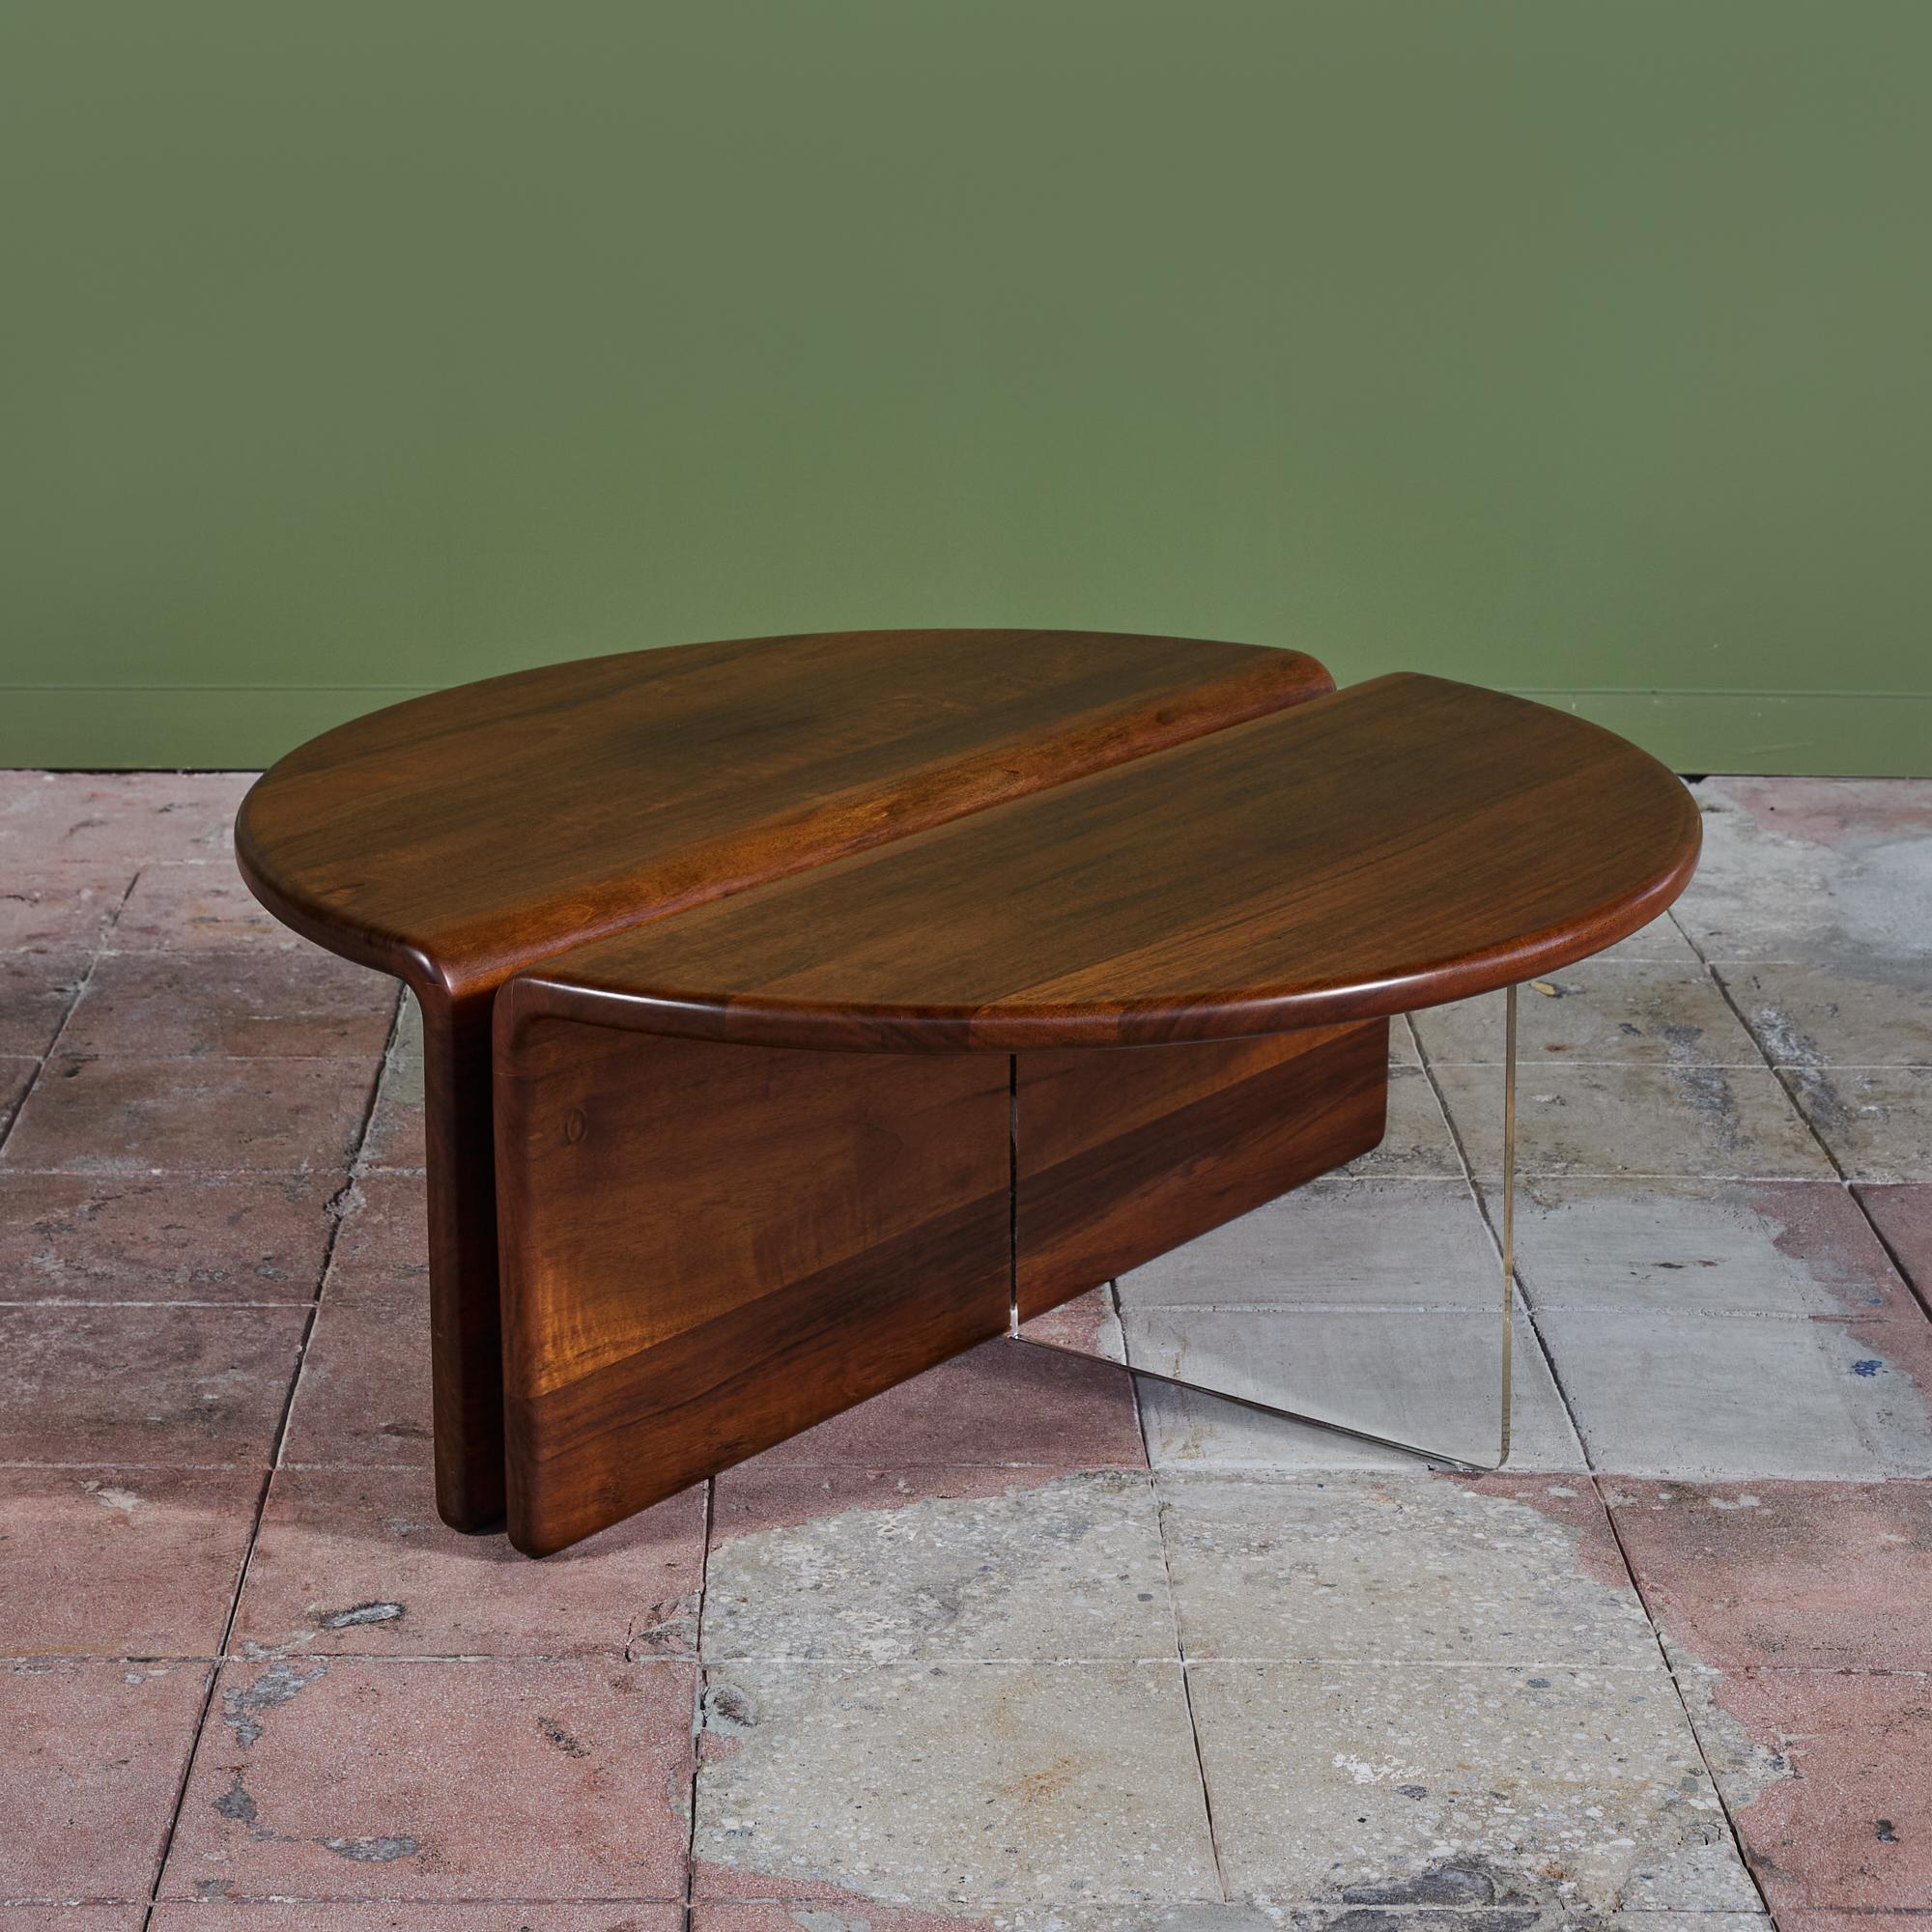 An American made coffee table, c.1970s, by Gerald McCabe is beautifully crafted from a solid slab of Shedua. The piece features two semi circular tables that sit side by side to form a circle or can be placed in juxtaposition for a fun look. The